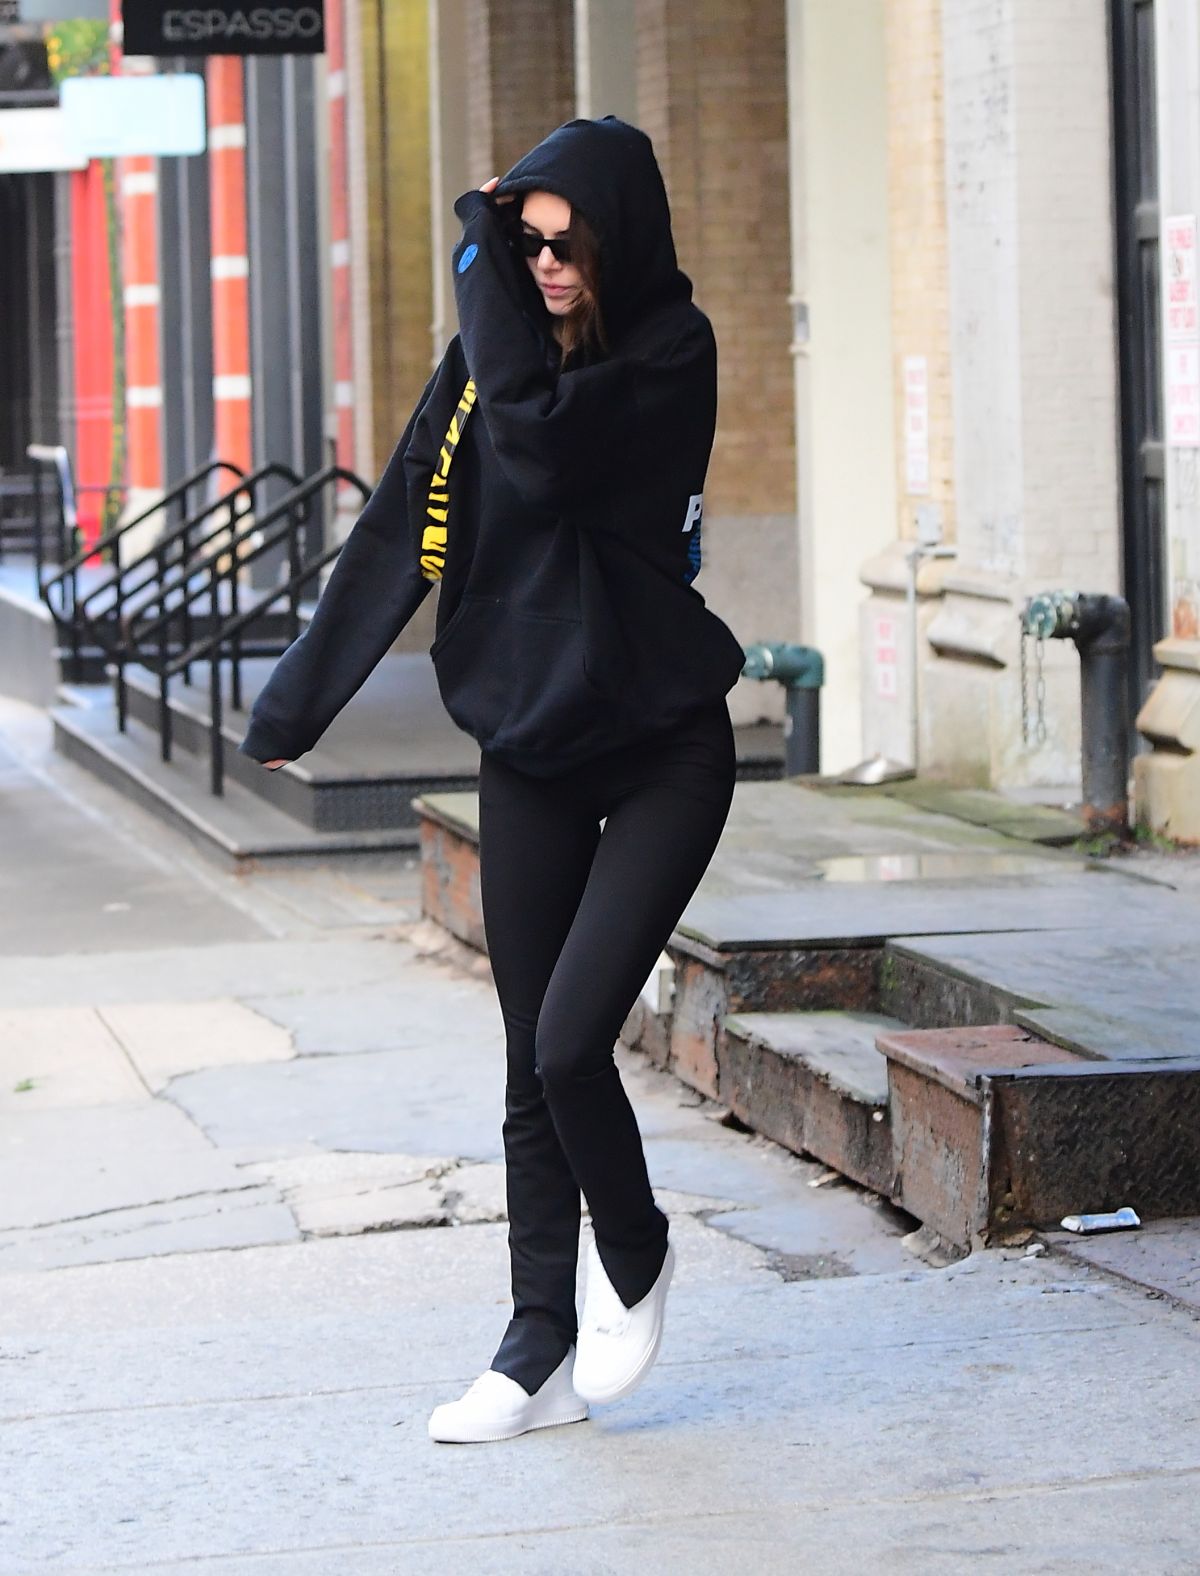 KENDALL JENNER at Bubby’s in New York 01/19/2020 – HawtCelebs